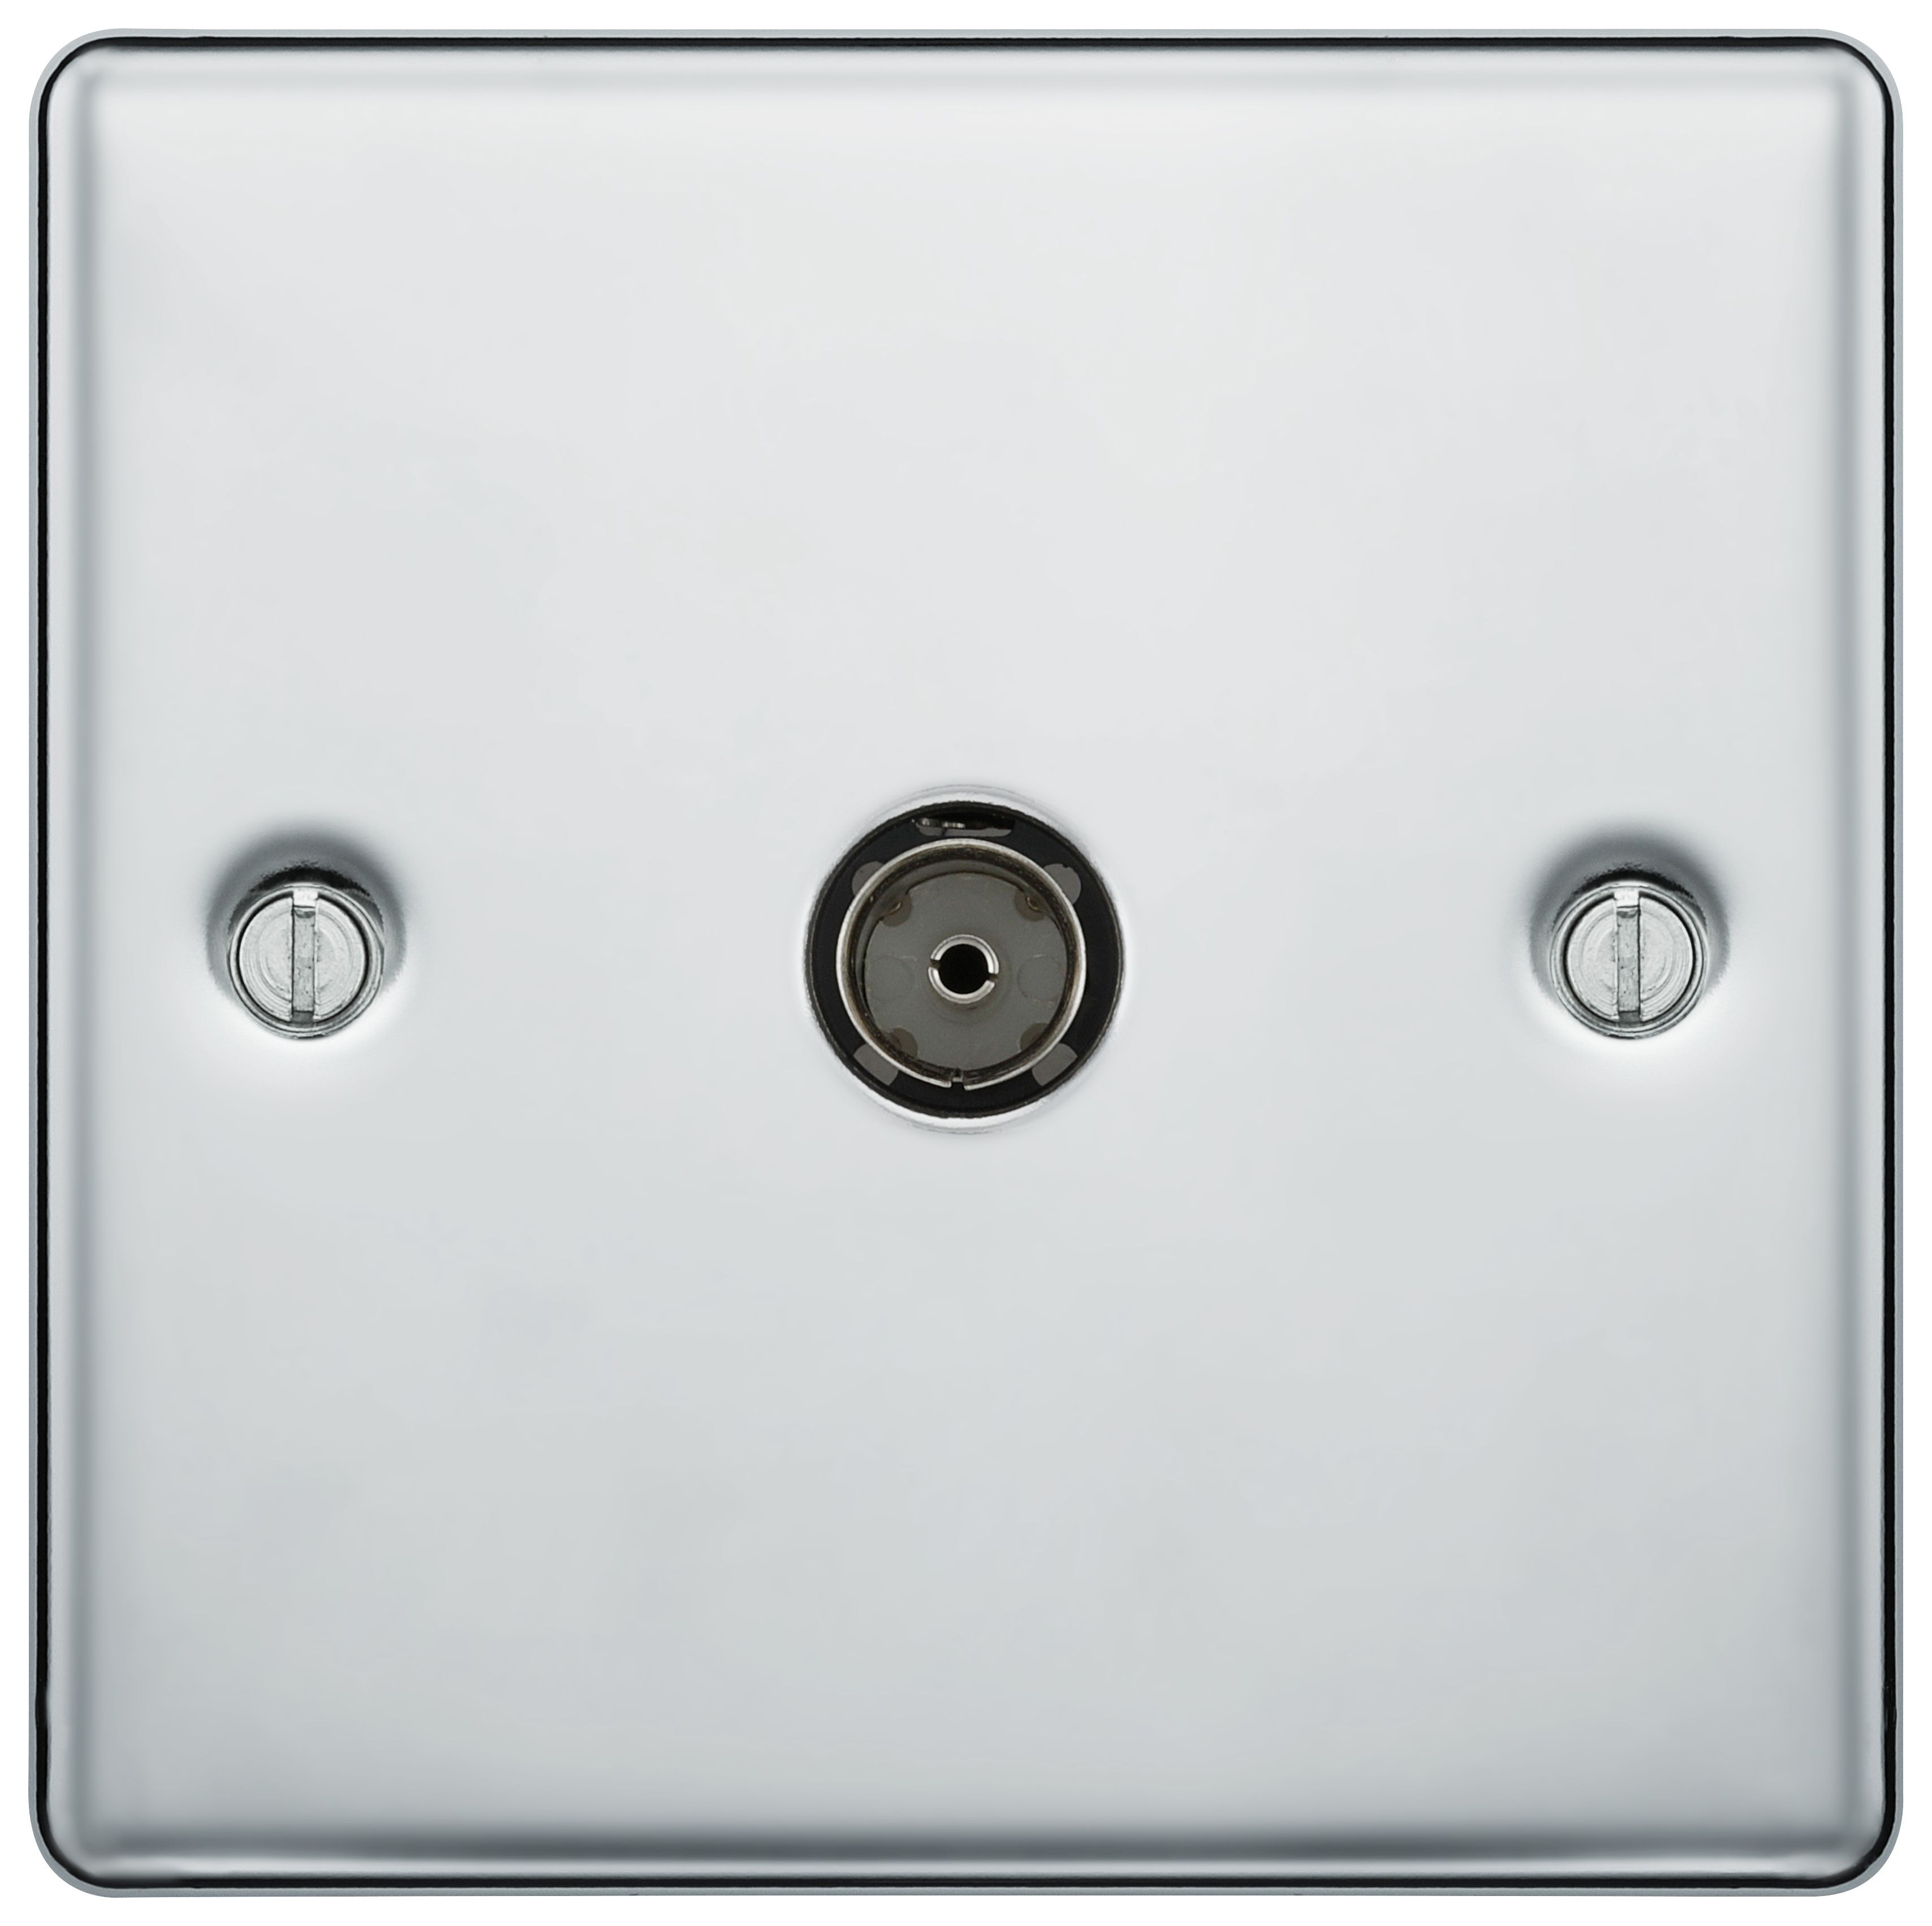 BG Screwed Raised Plate Single Socket For Tv Or Fm Co-Axial Aerial Connection - Polished Chrome